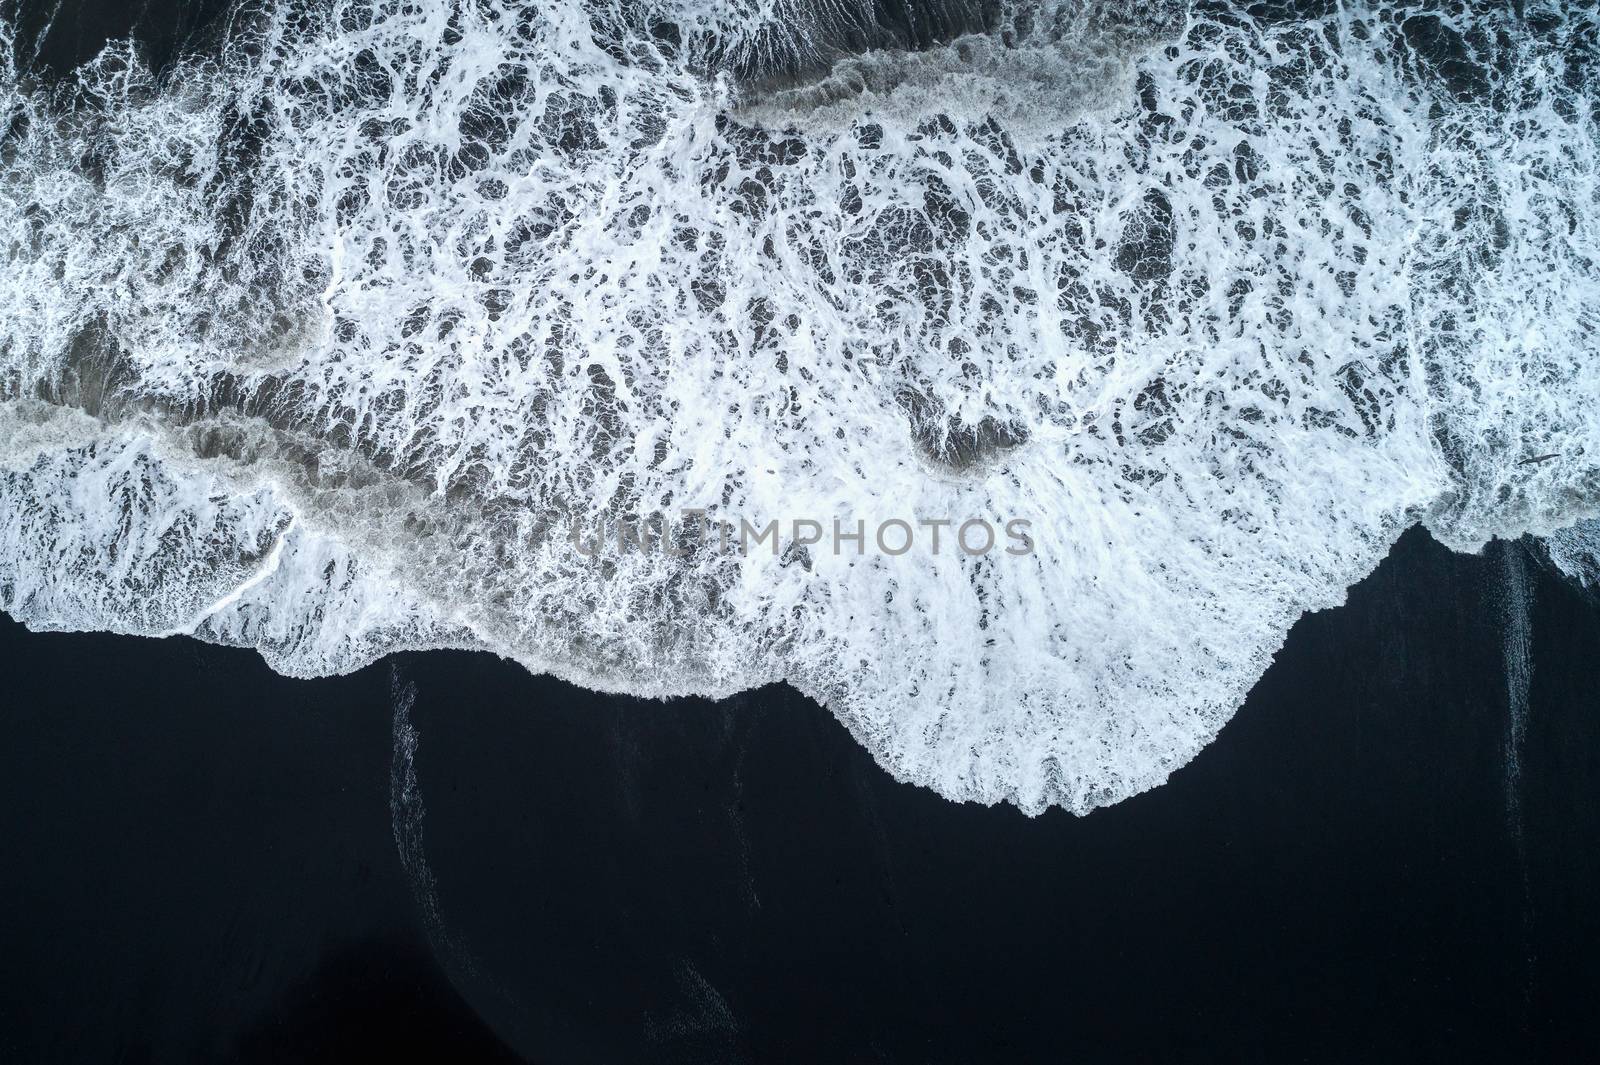 Aerial view of Black sand beach and ocean waves in Iceland. by gutarphotoghaphy